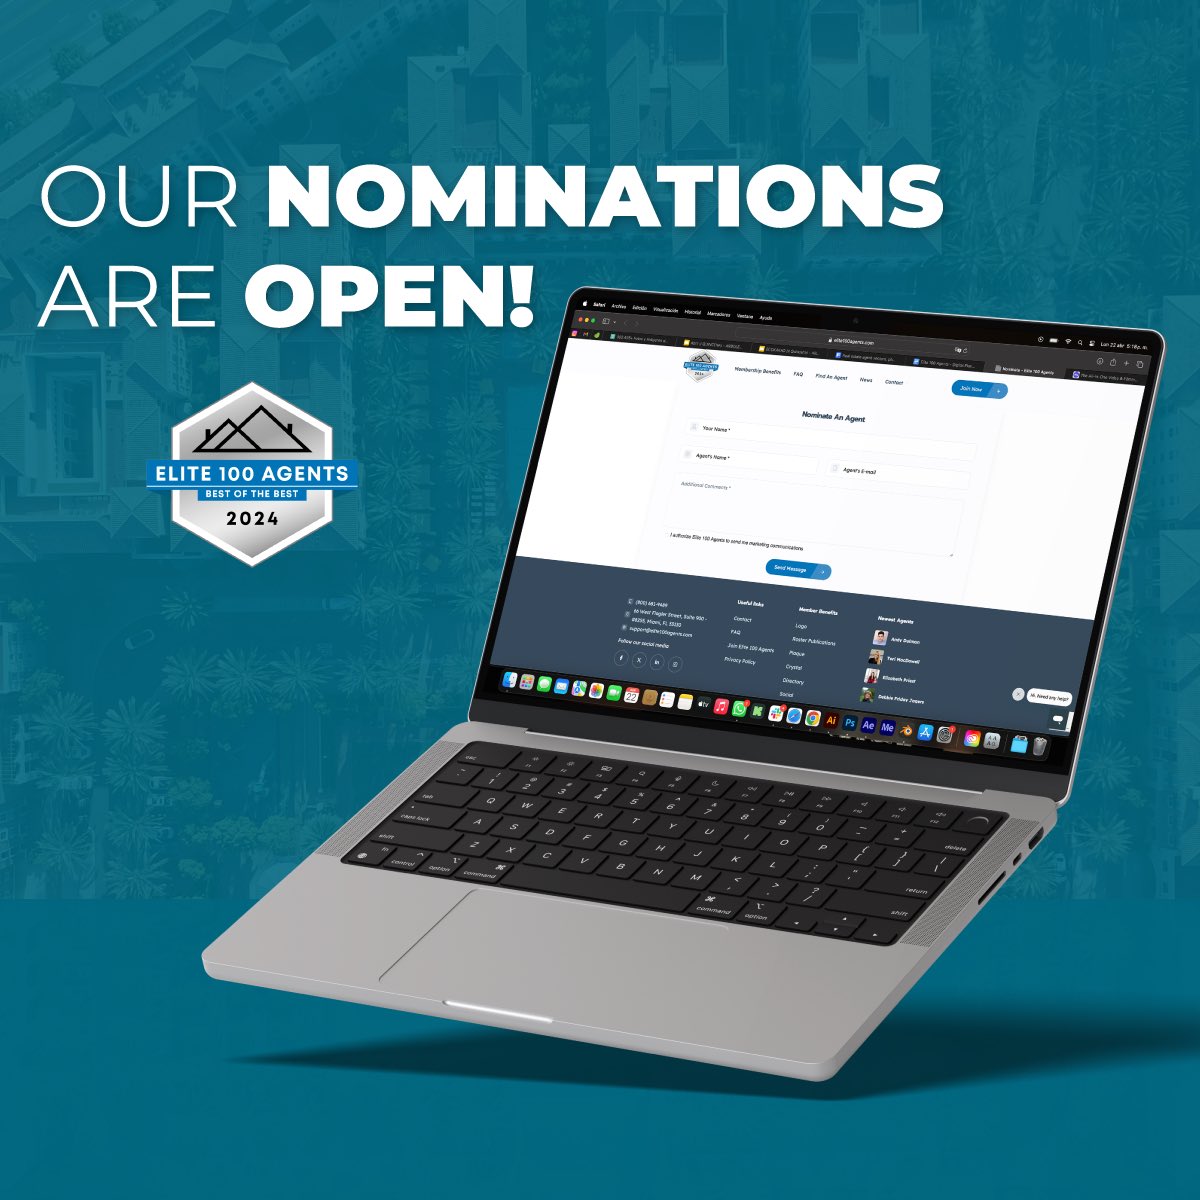 Do you know someone that might have what it takes? Our nominations are open! Lead them to where they belong. 🤝 Visit: elite100agents.com/nominate/ to learn more. 💻 #realestate #realestateagent #luxuryrealestate #elite100agents #californiarealestate #newyorkrealestate